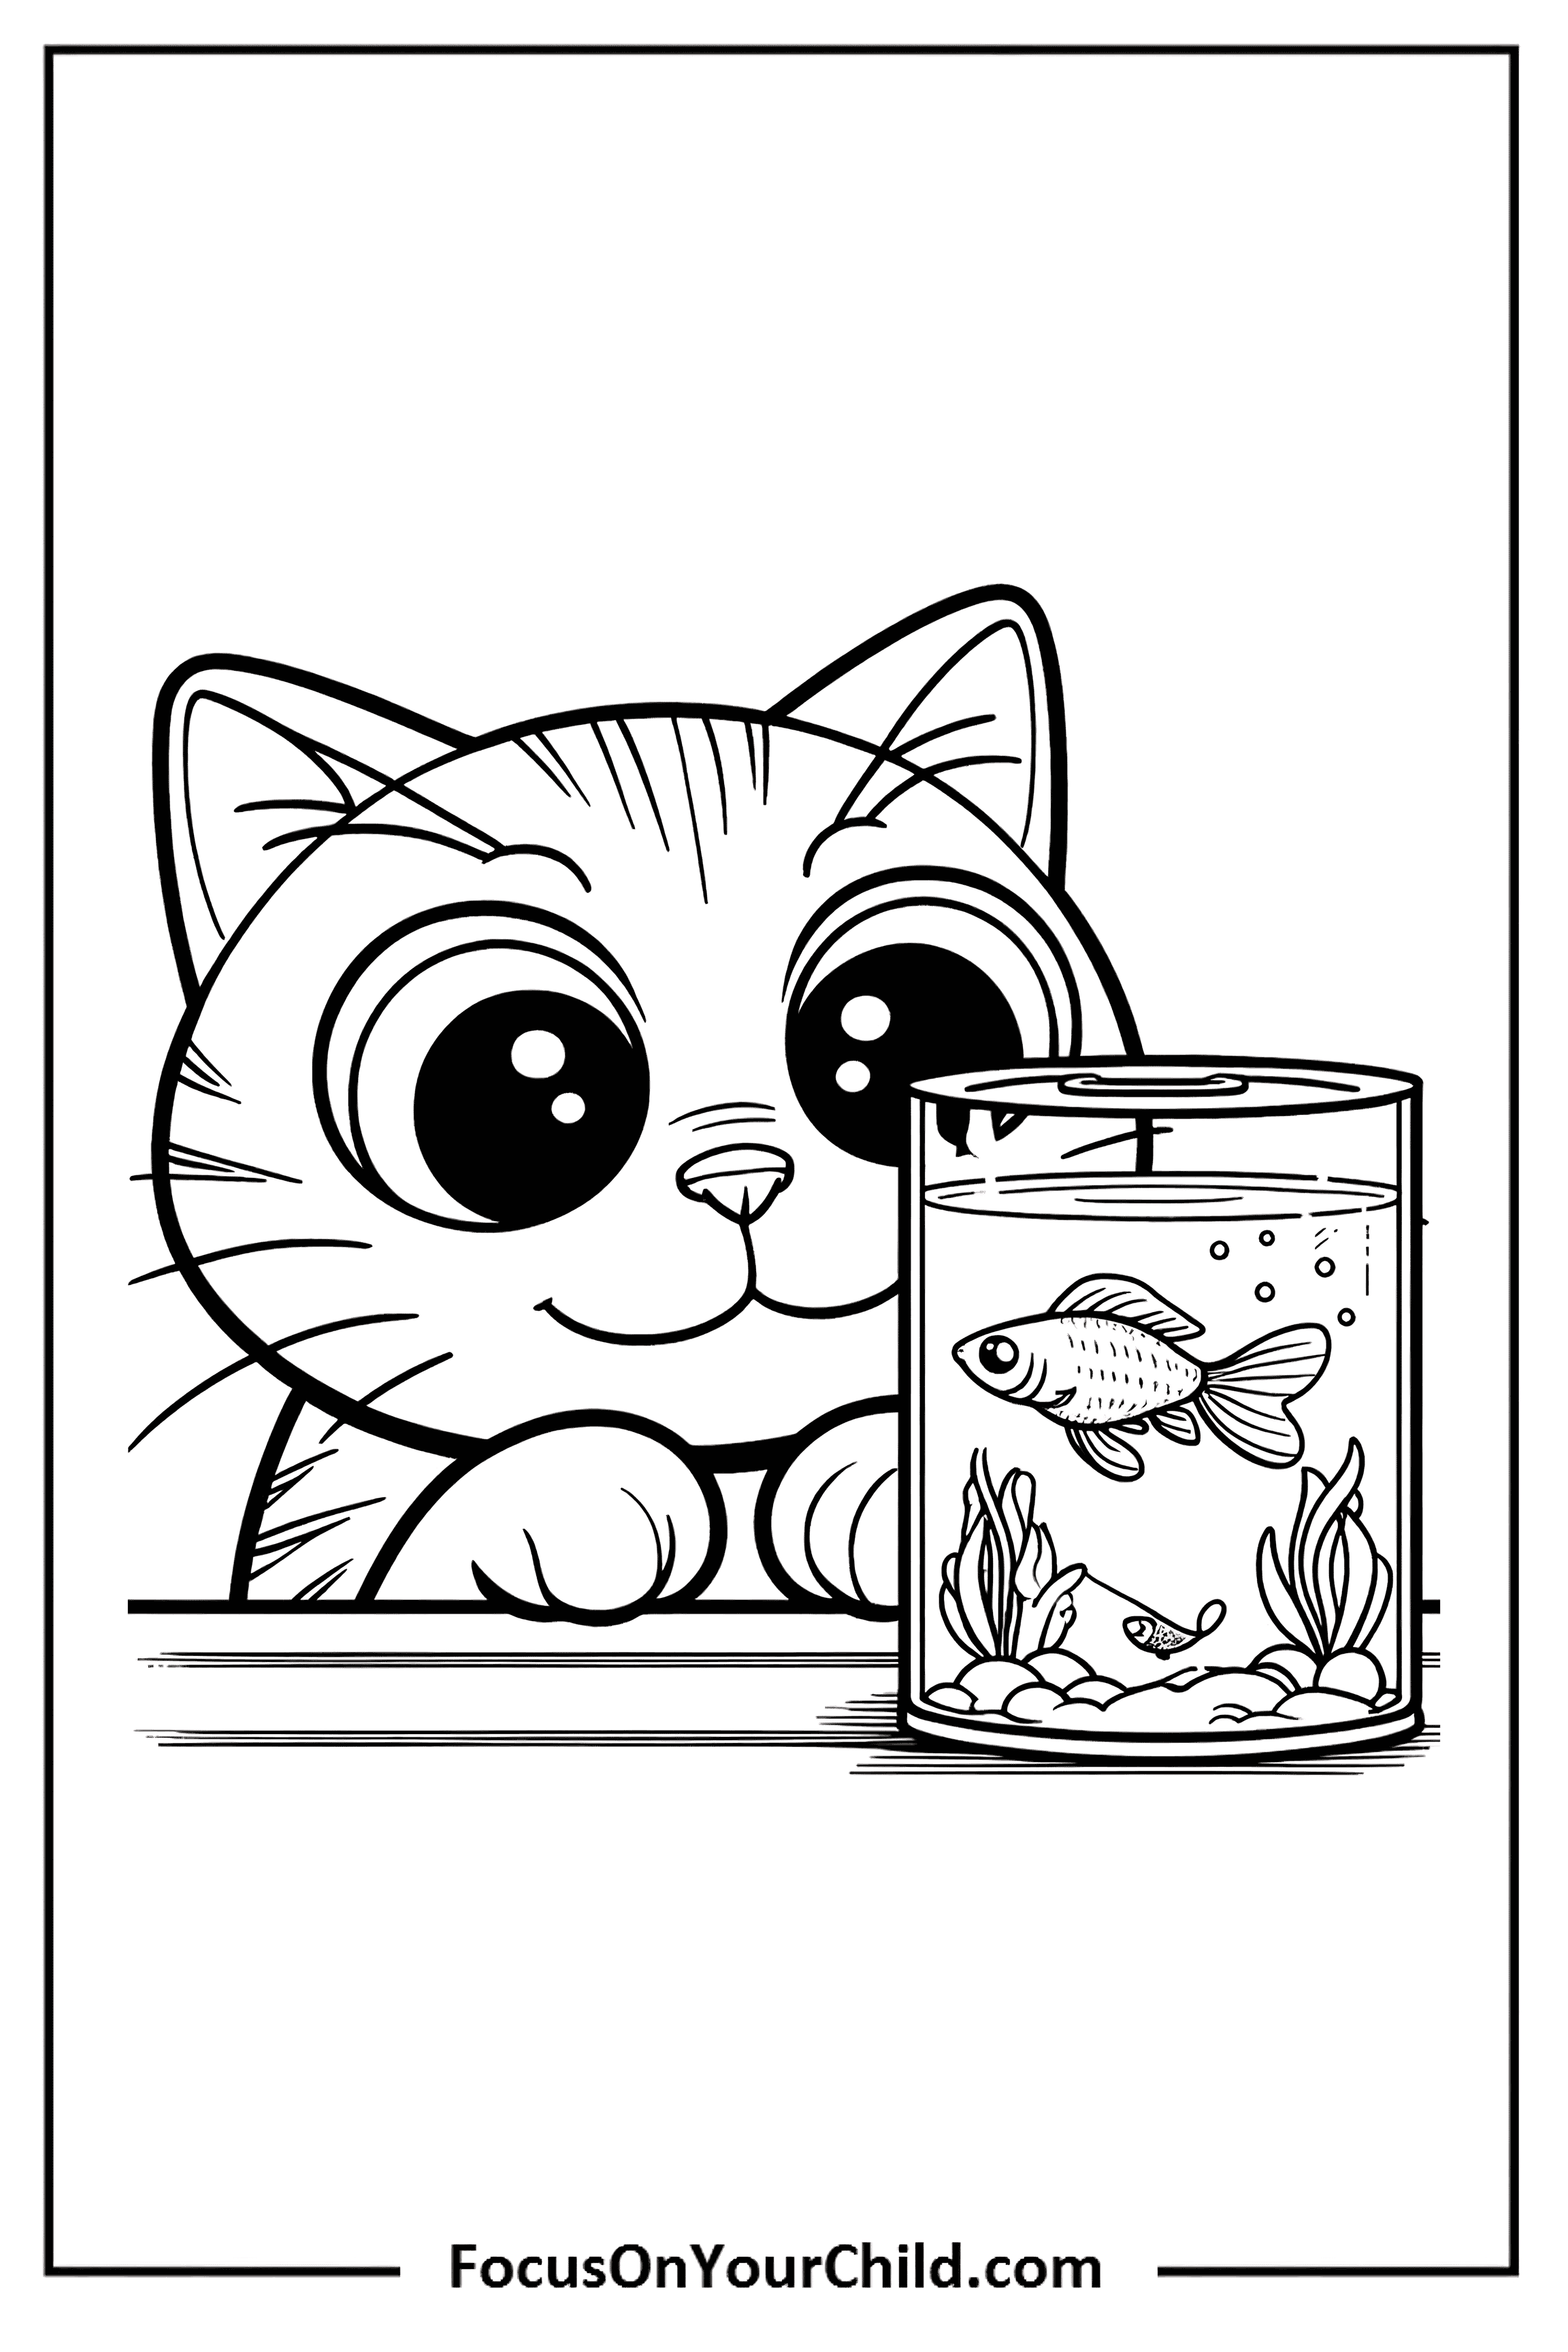 Charming cat watching fish in transparent bowl with aquatic plants and bubbles.